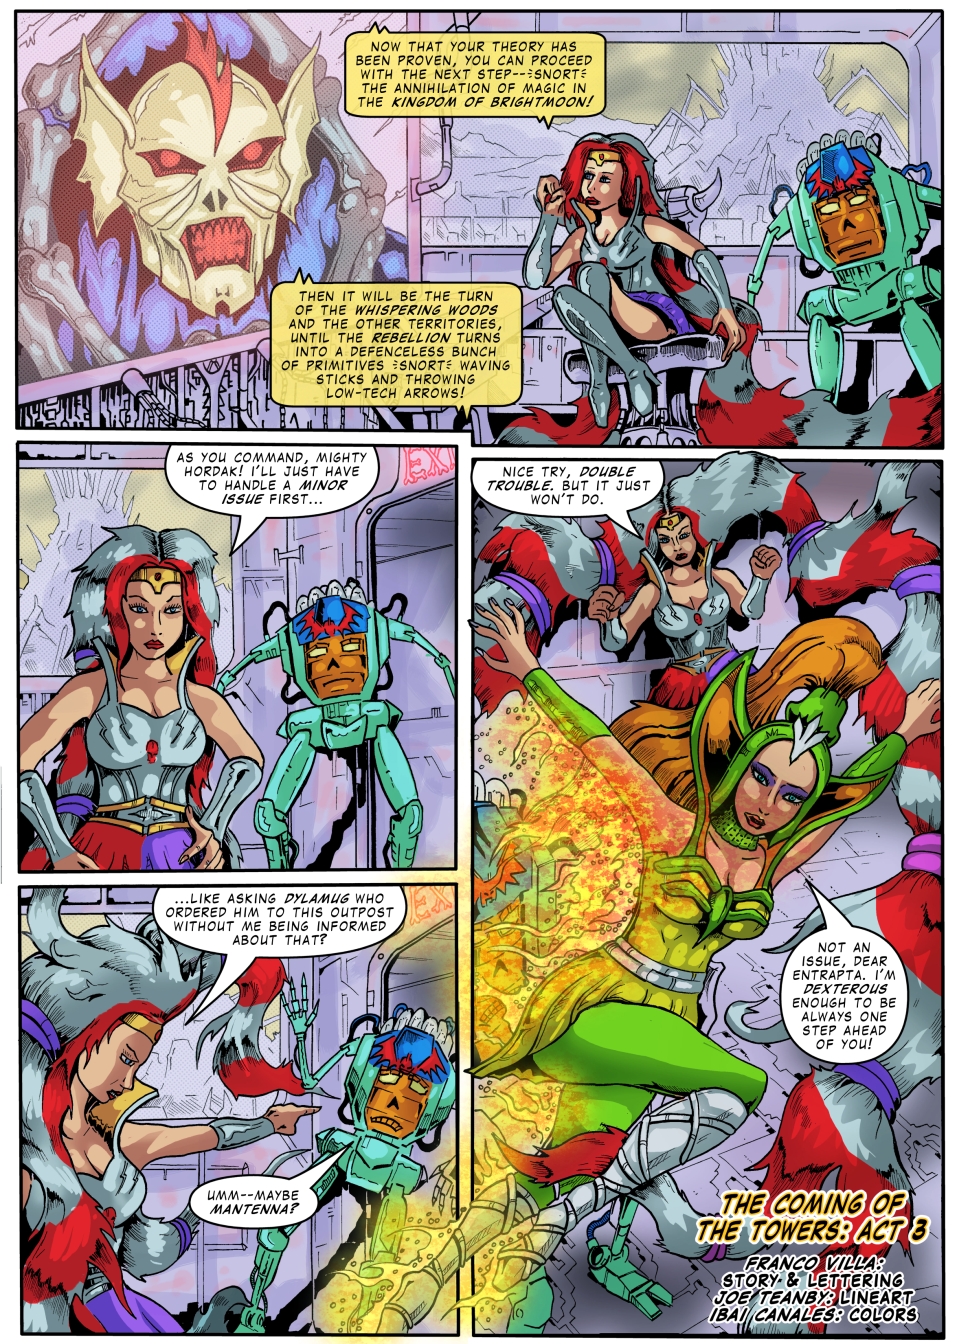 PoP/MotU - The Coming of the Towers - page 7